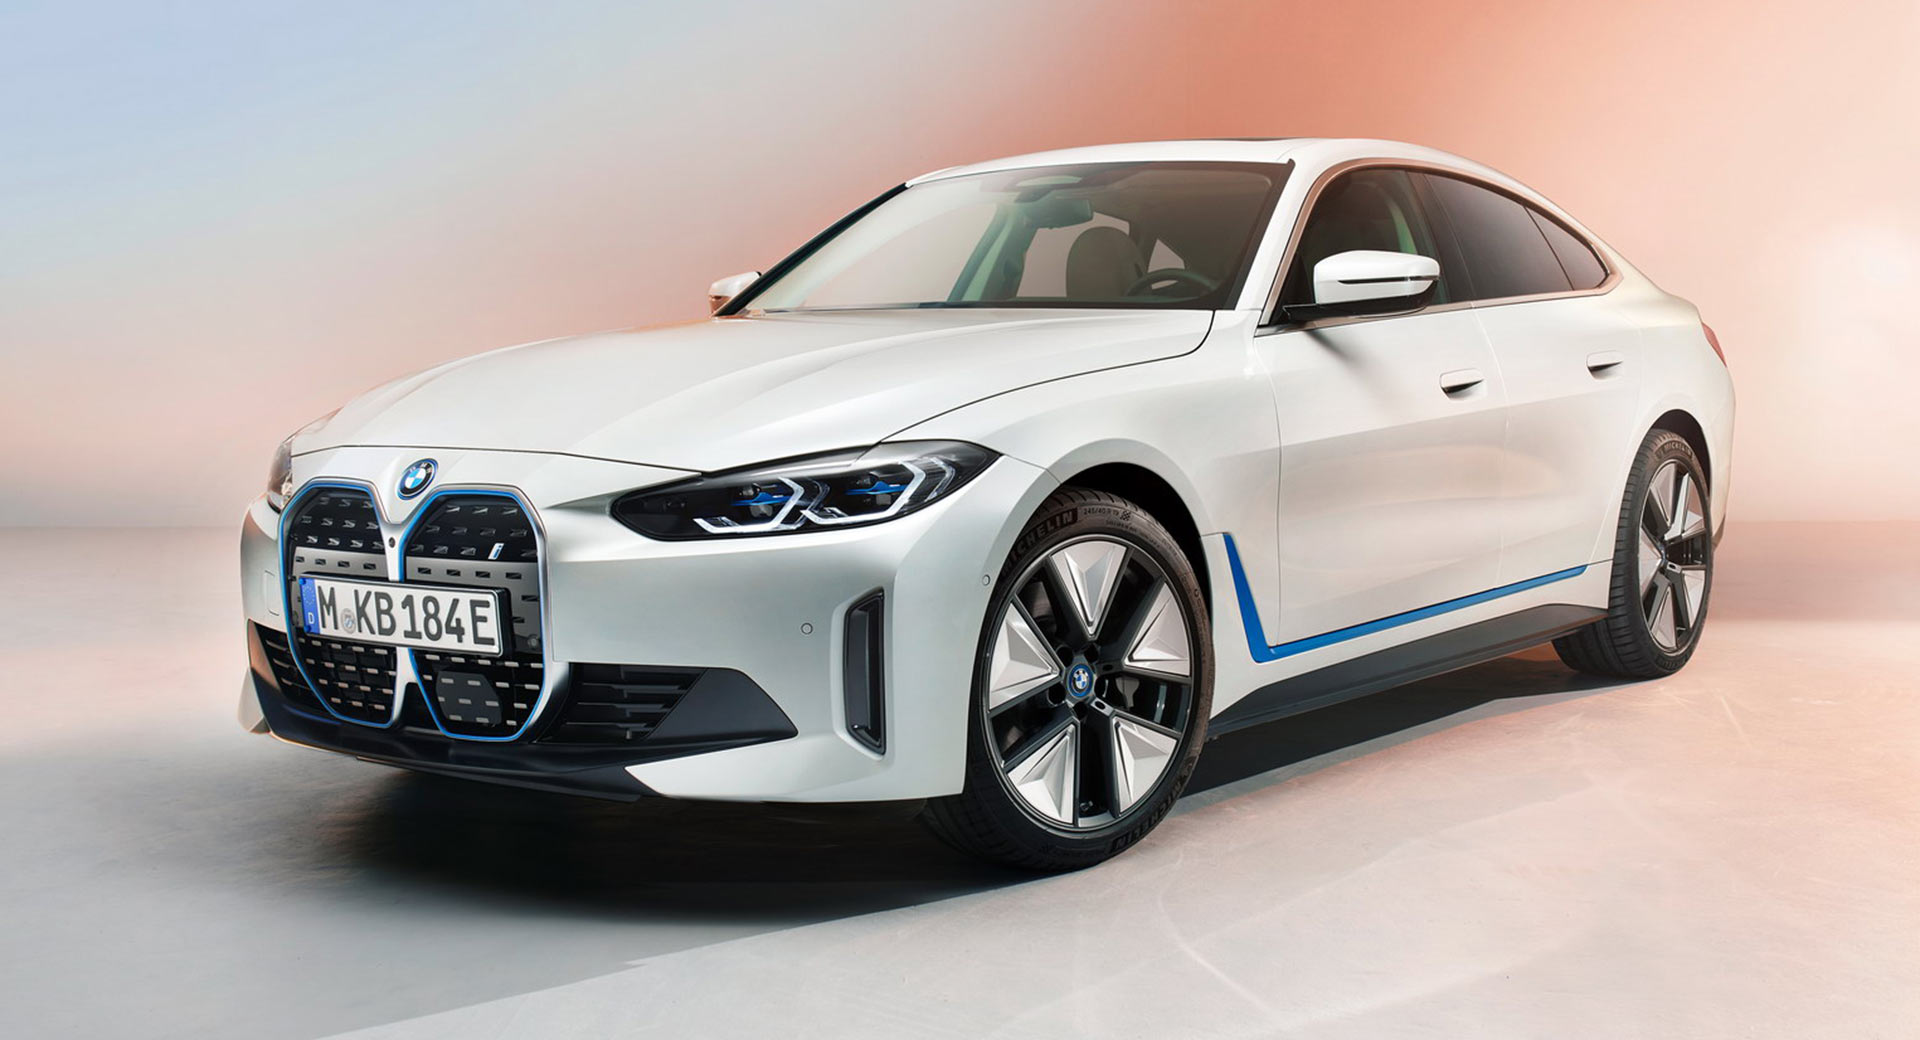 Australian Shoppers Can Now Reserve The All-Electric BMW i4